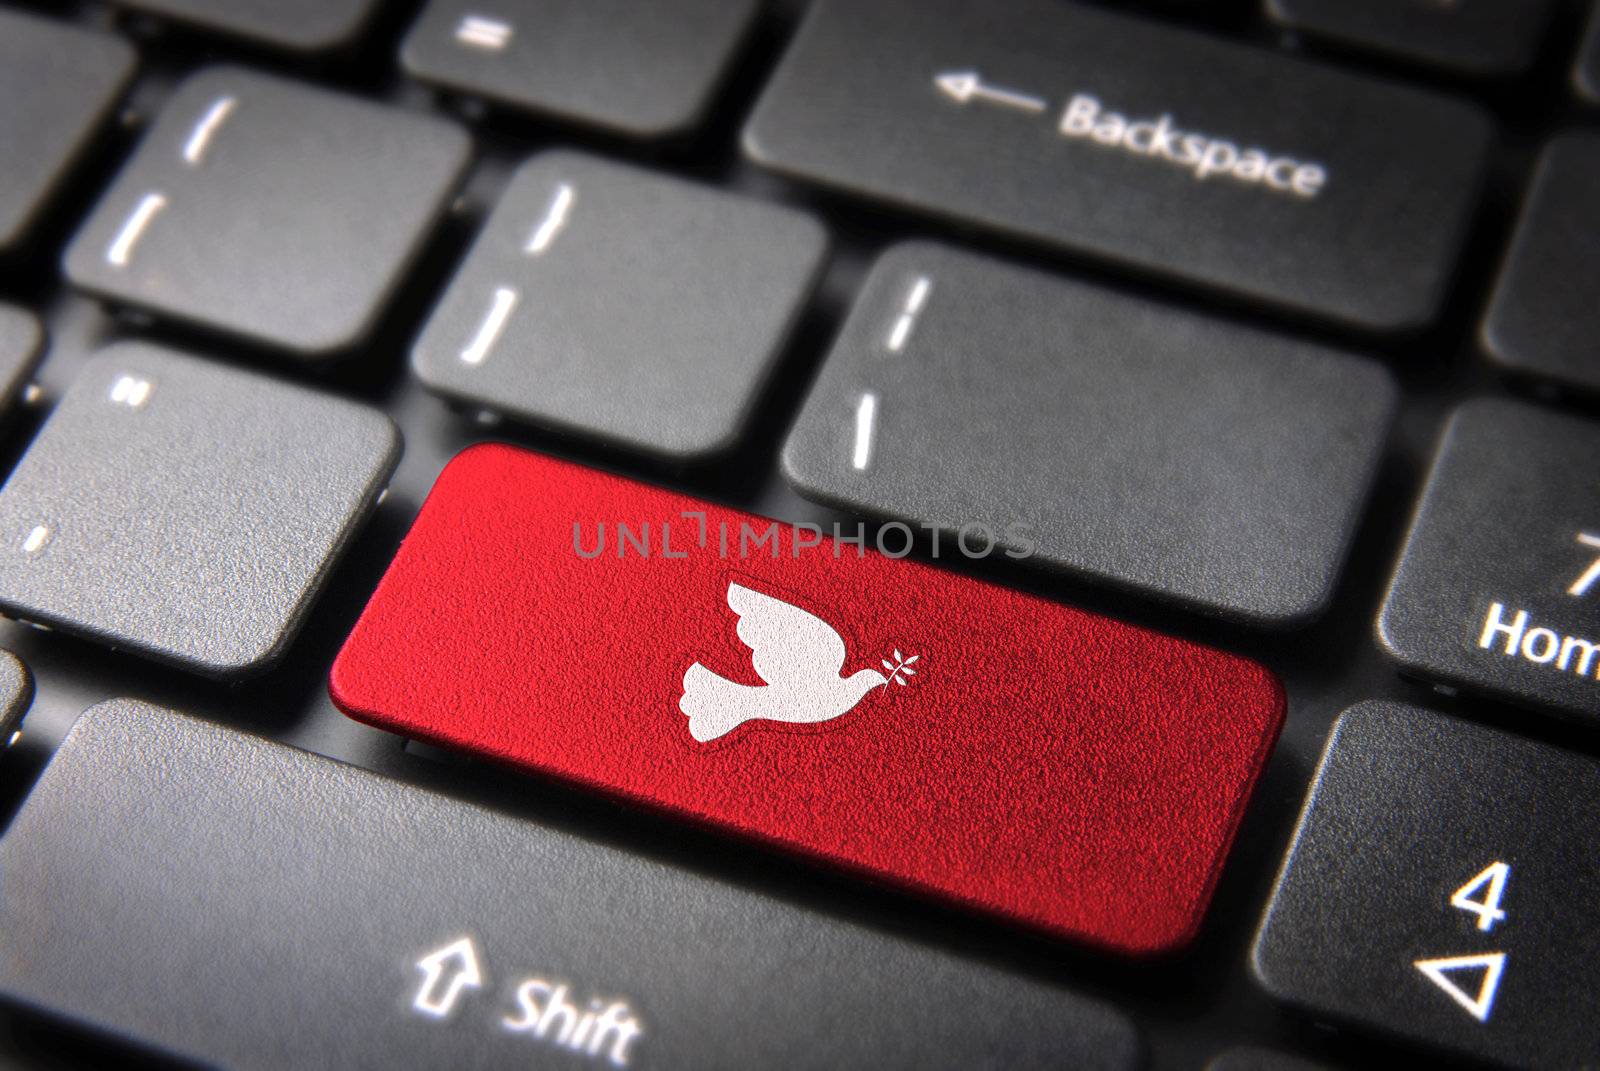 Re Christmas key with peace dove icon on laptop keyboard. Included clipping path, so you can easily edit it.